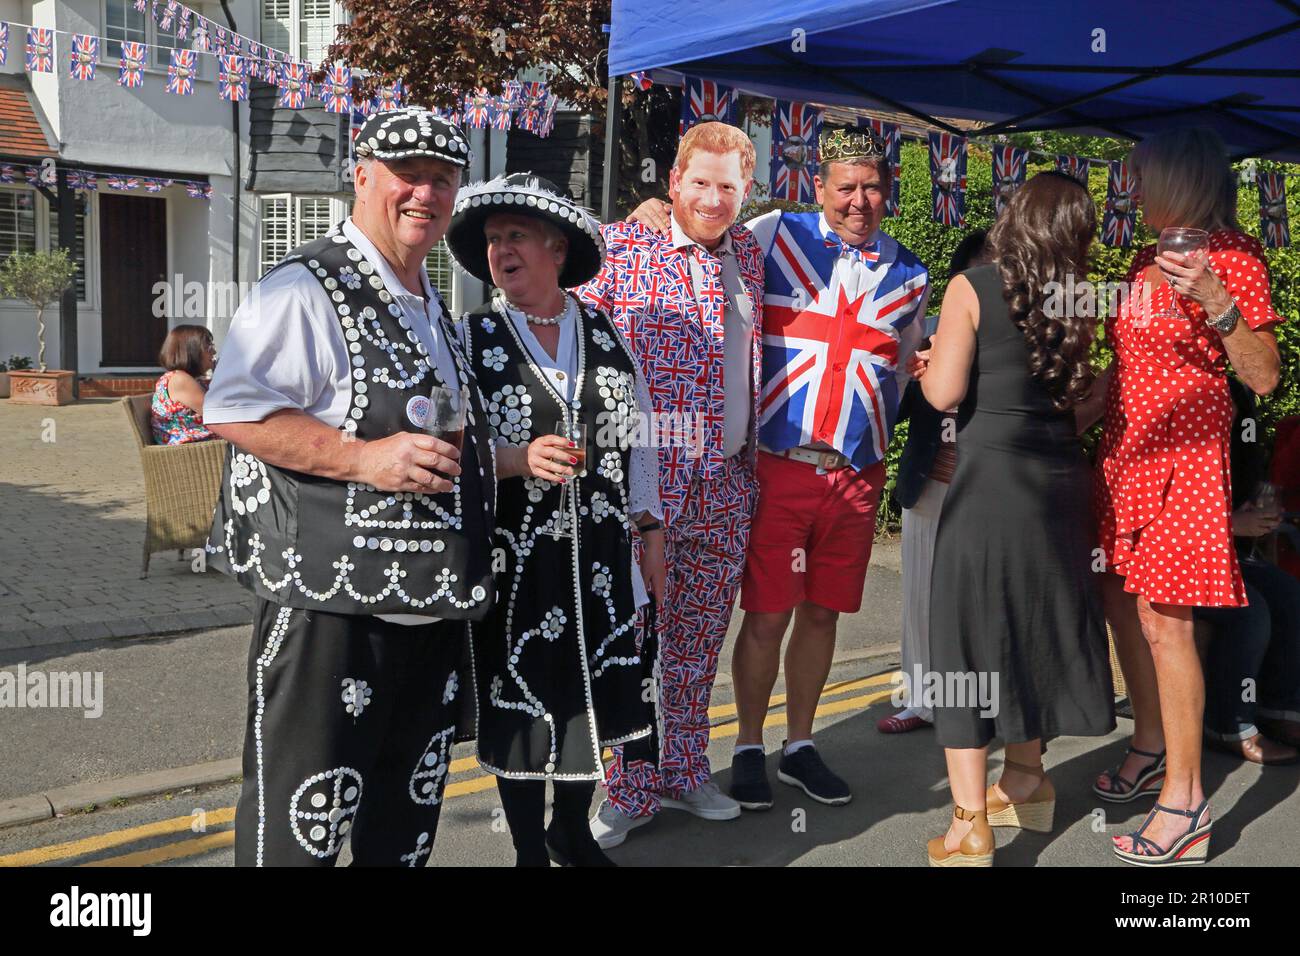 Portrait of Pearly King And Queen and People dressed as Prince Harry and Meghan at Street Party Celebrating King Charles III Coronation Surrey England Stock Photo